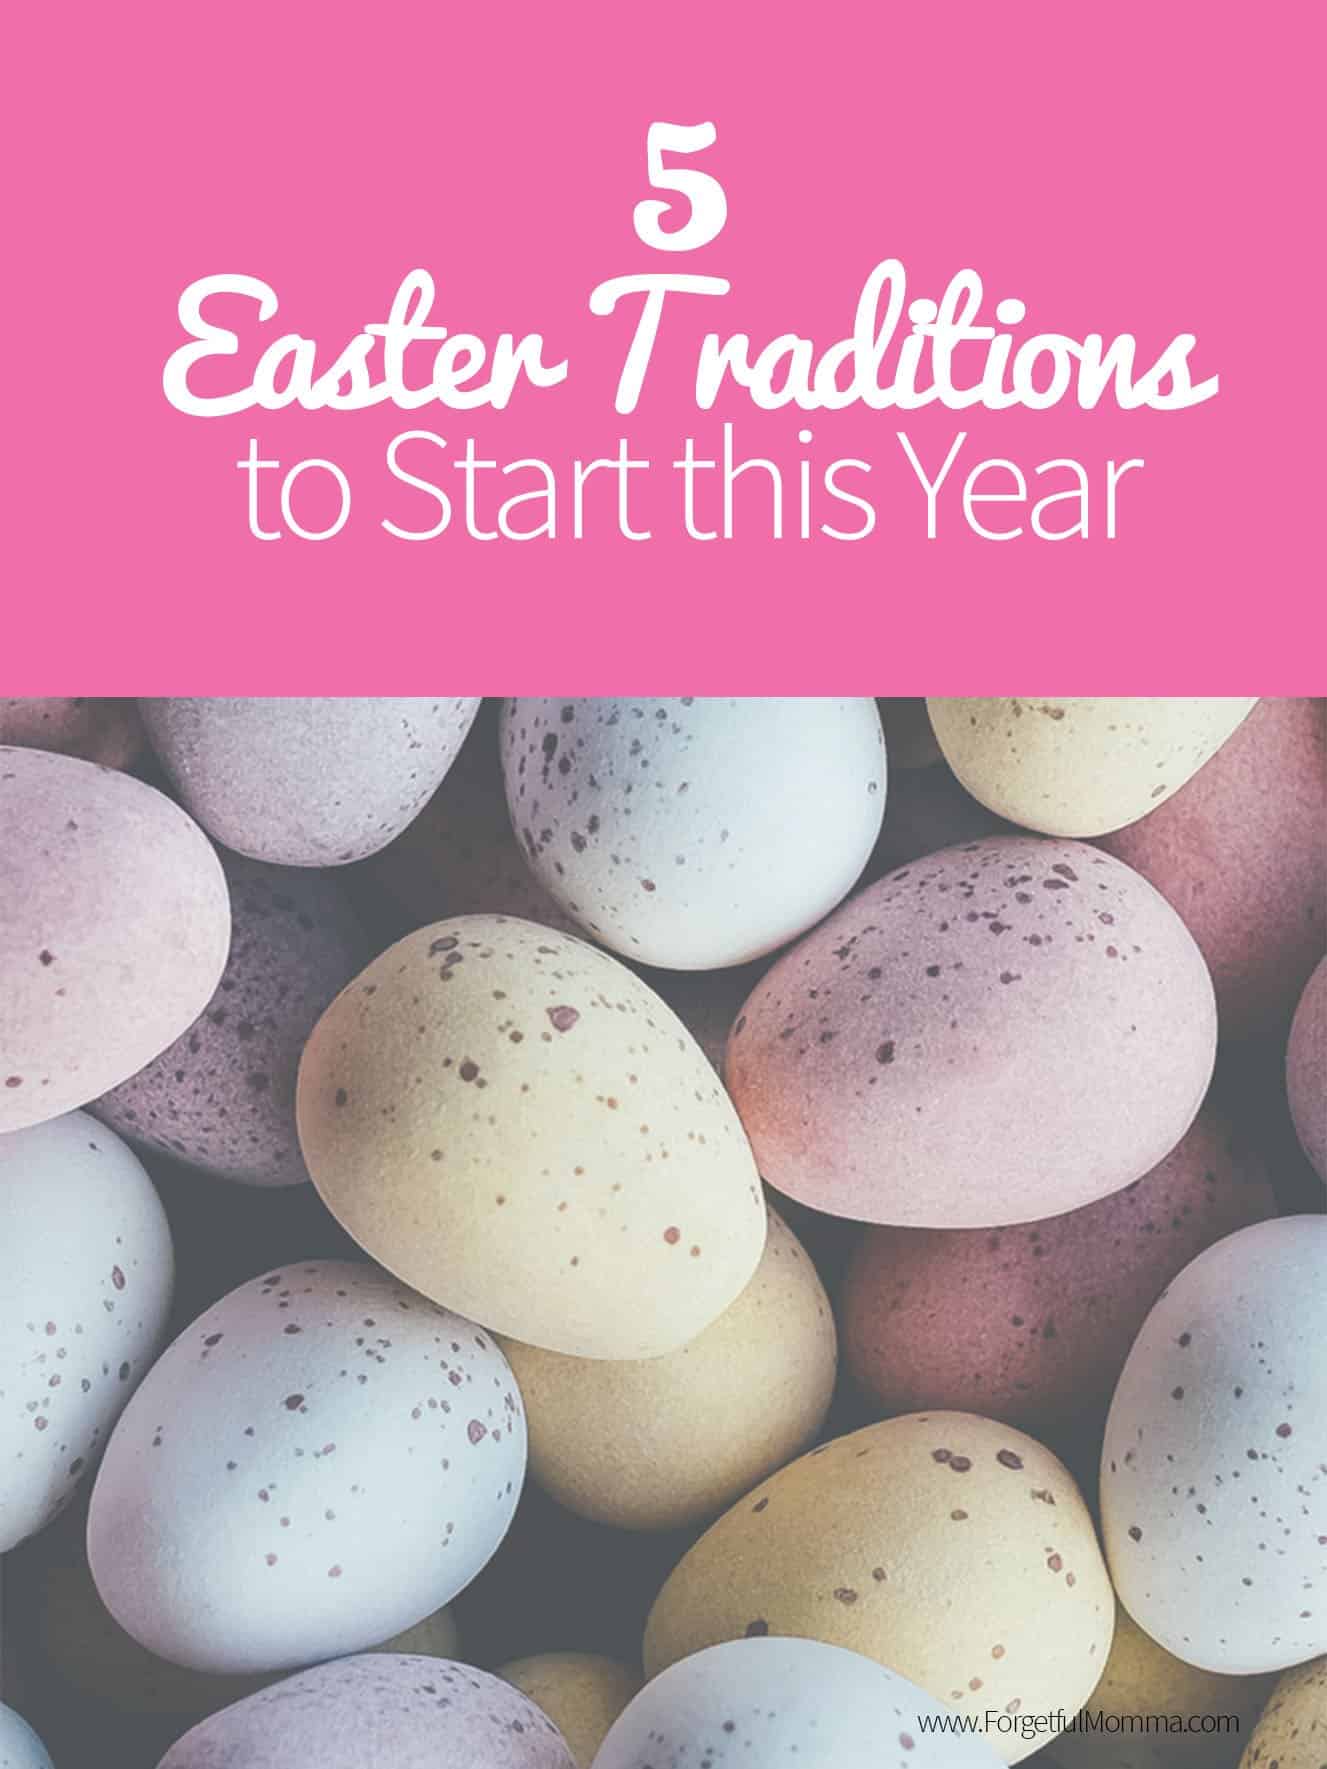 5 Easter Traditions to Start this Year